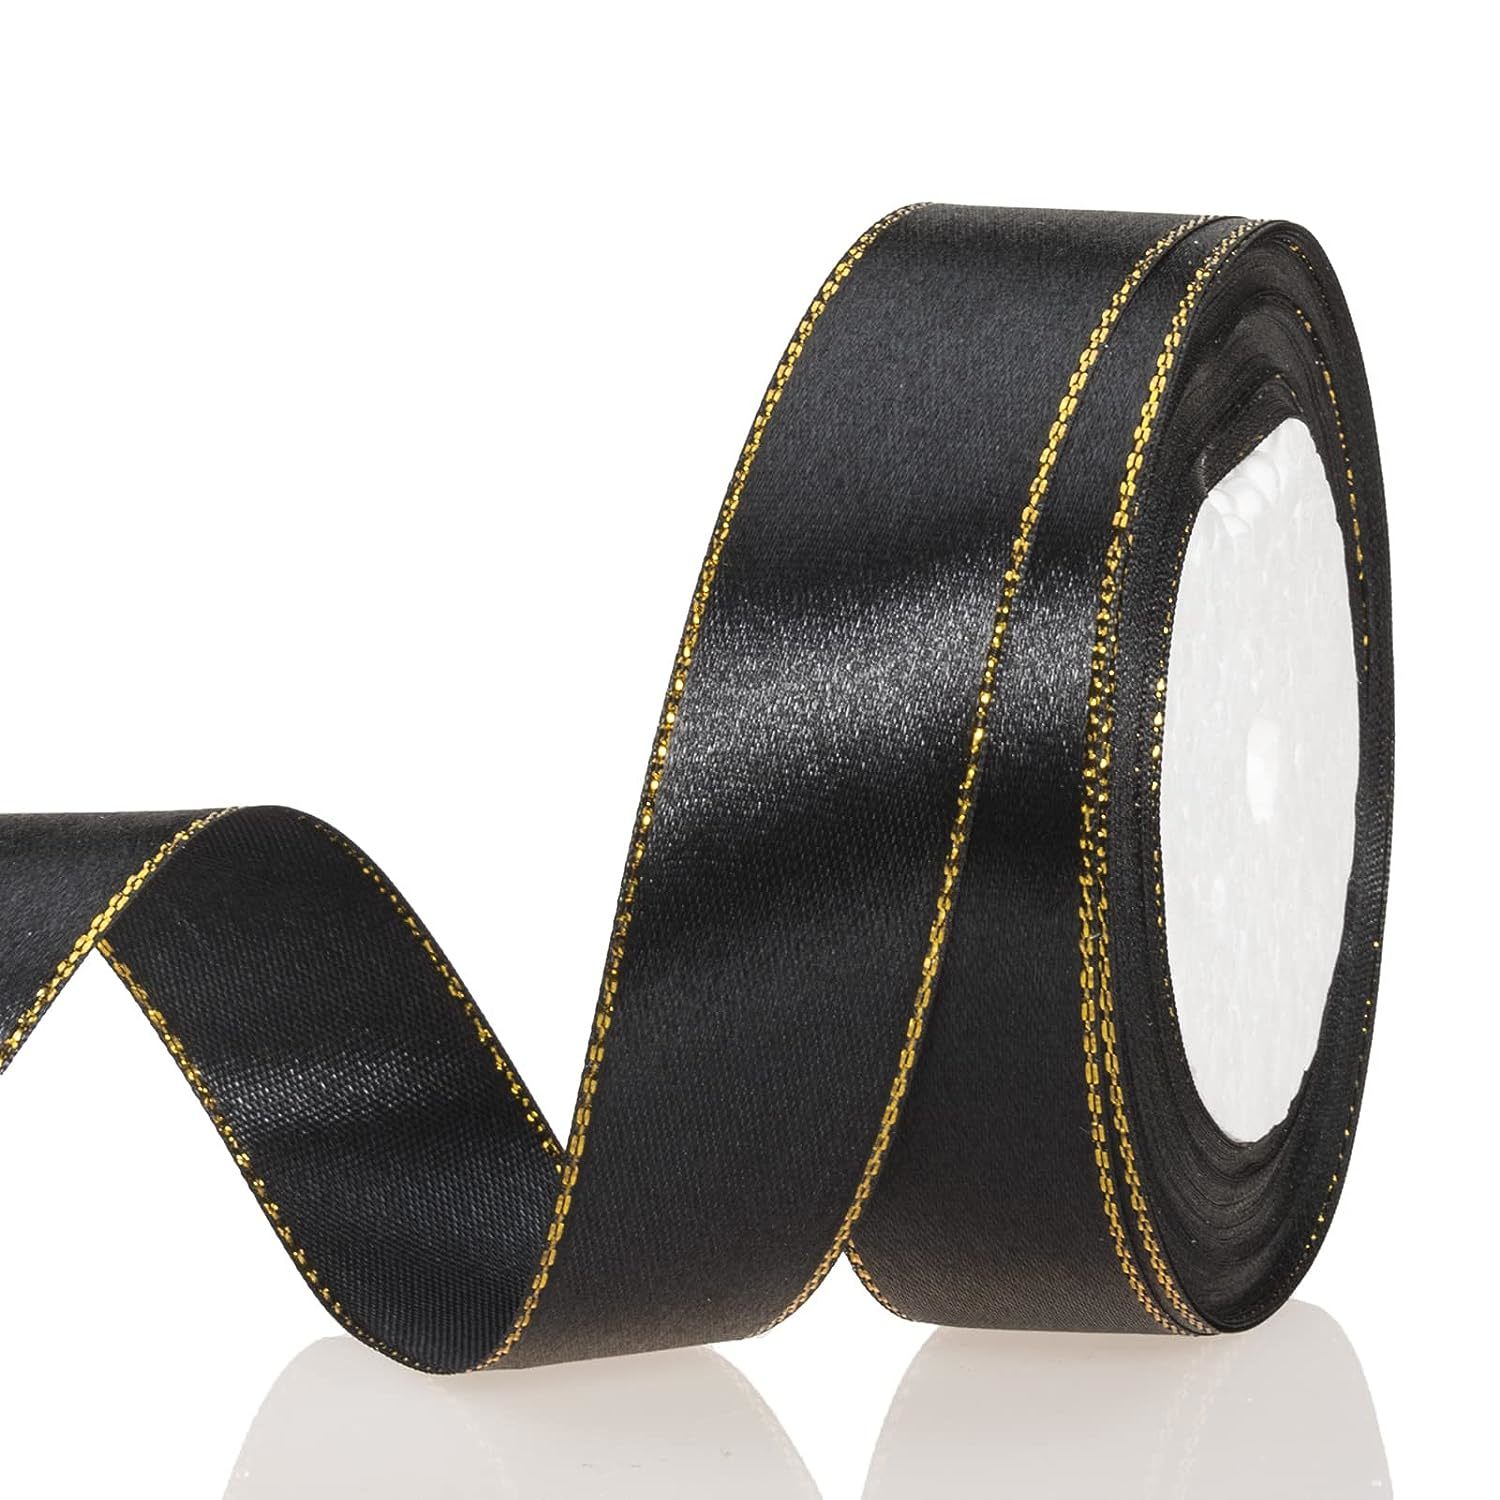 Double Faced Satin Ribbon by the Bolt - 25yds